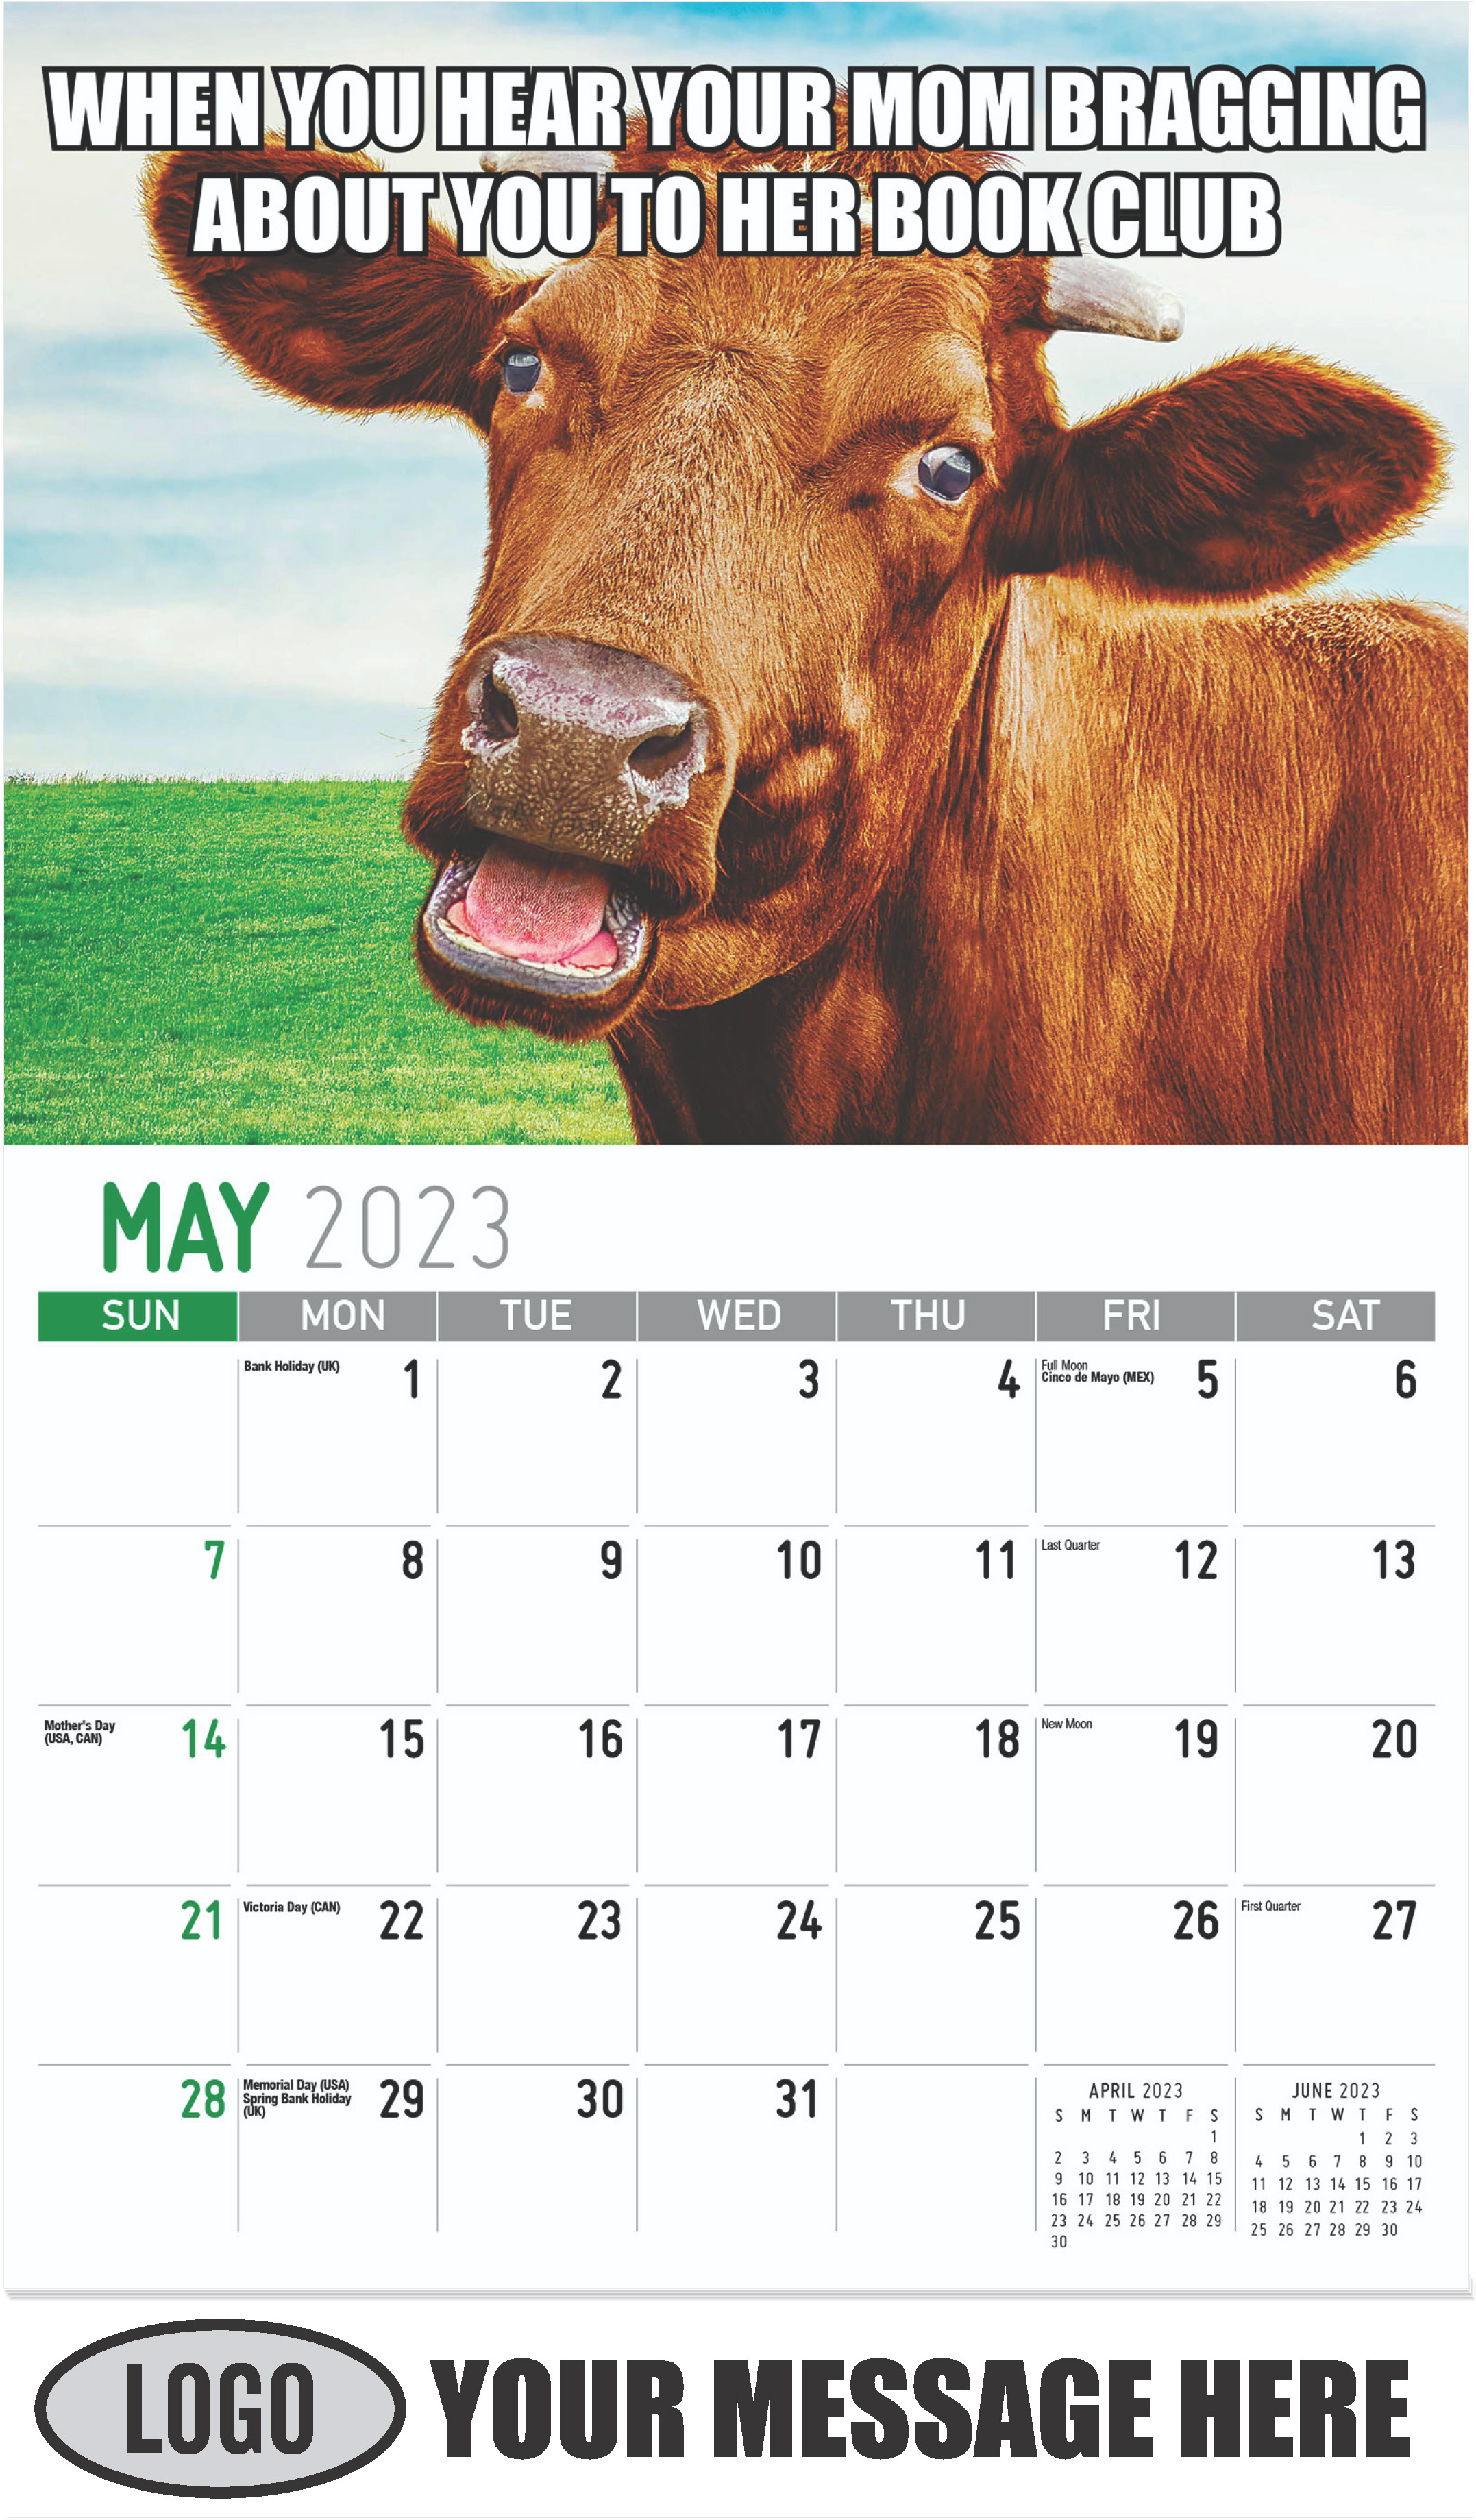 MY BOSS TOLD ME TO HAVE A GOOD DAY – SO I WENT HOME
 - May - The Memeing of Life 2023 Promotional Calendar